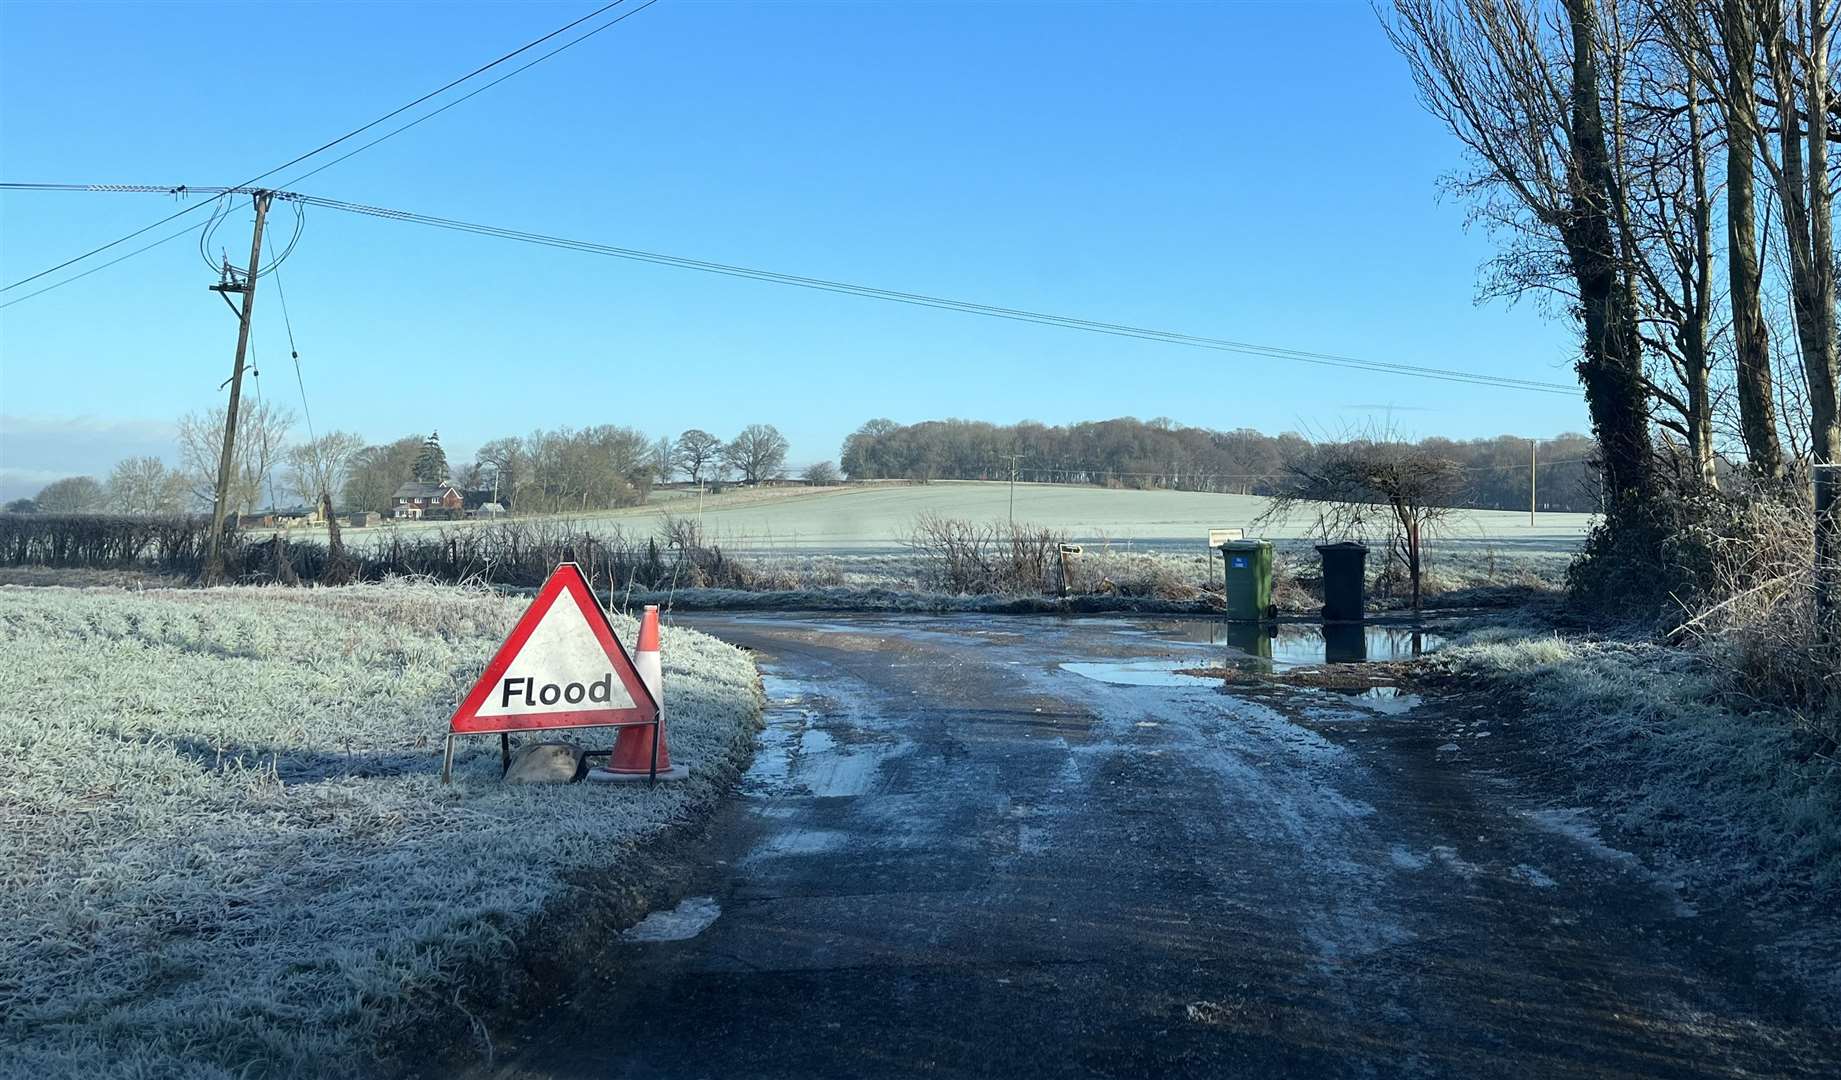 The road has been hit by flooding